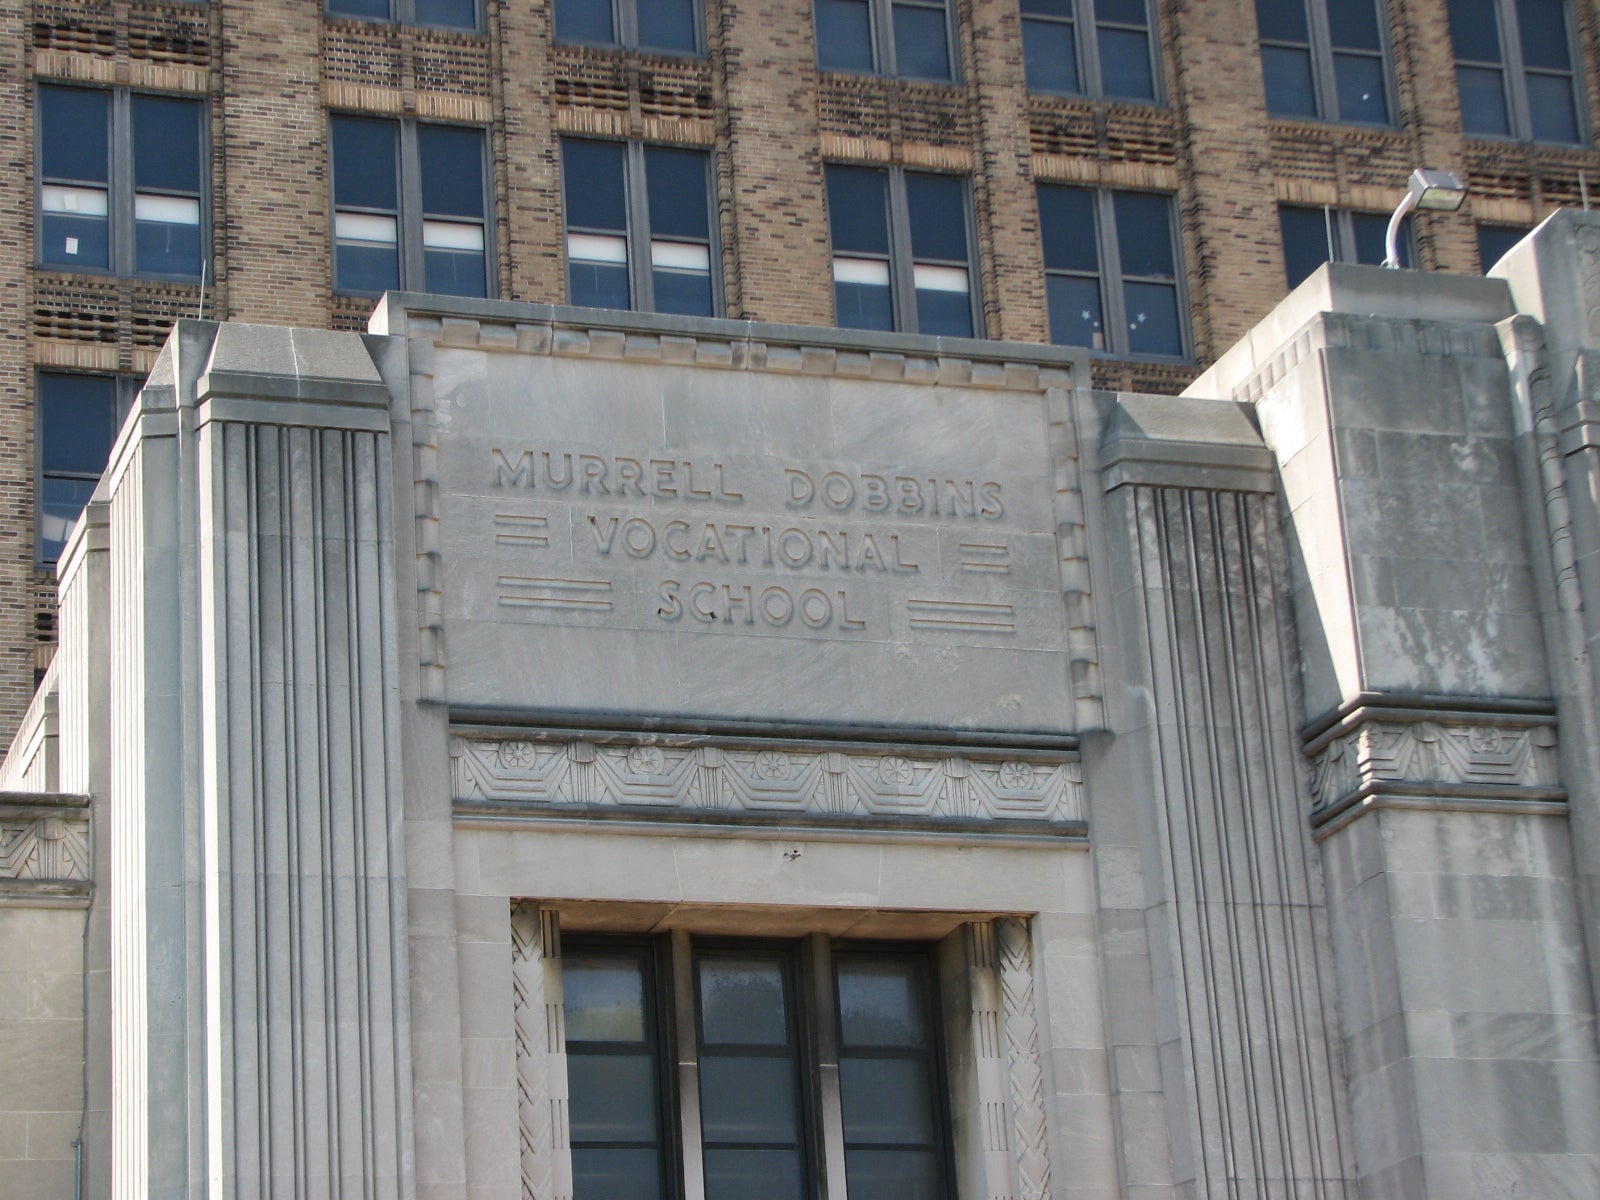 Dobbins Vocational School was built in 1936 in the Art Deco style by Irwin T. Catharine.